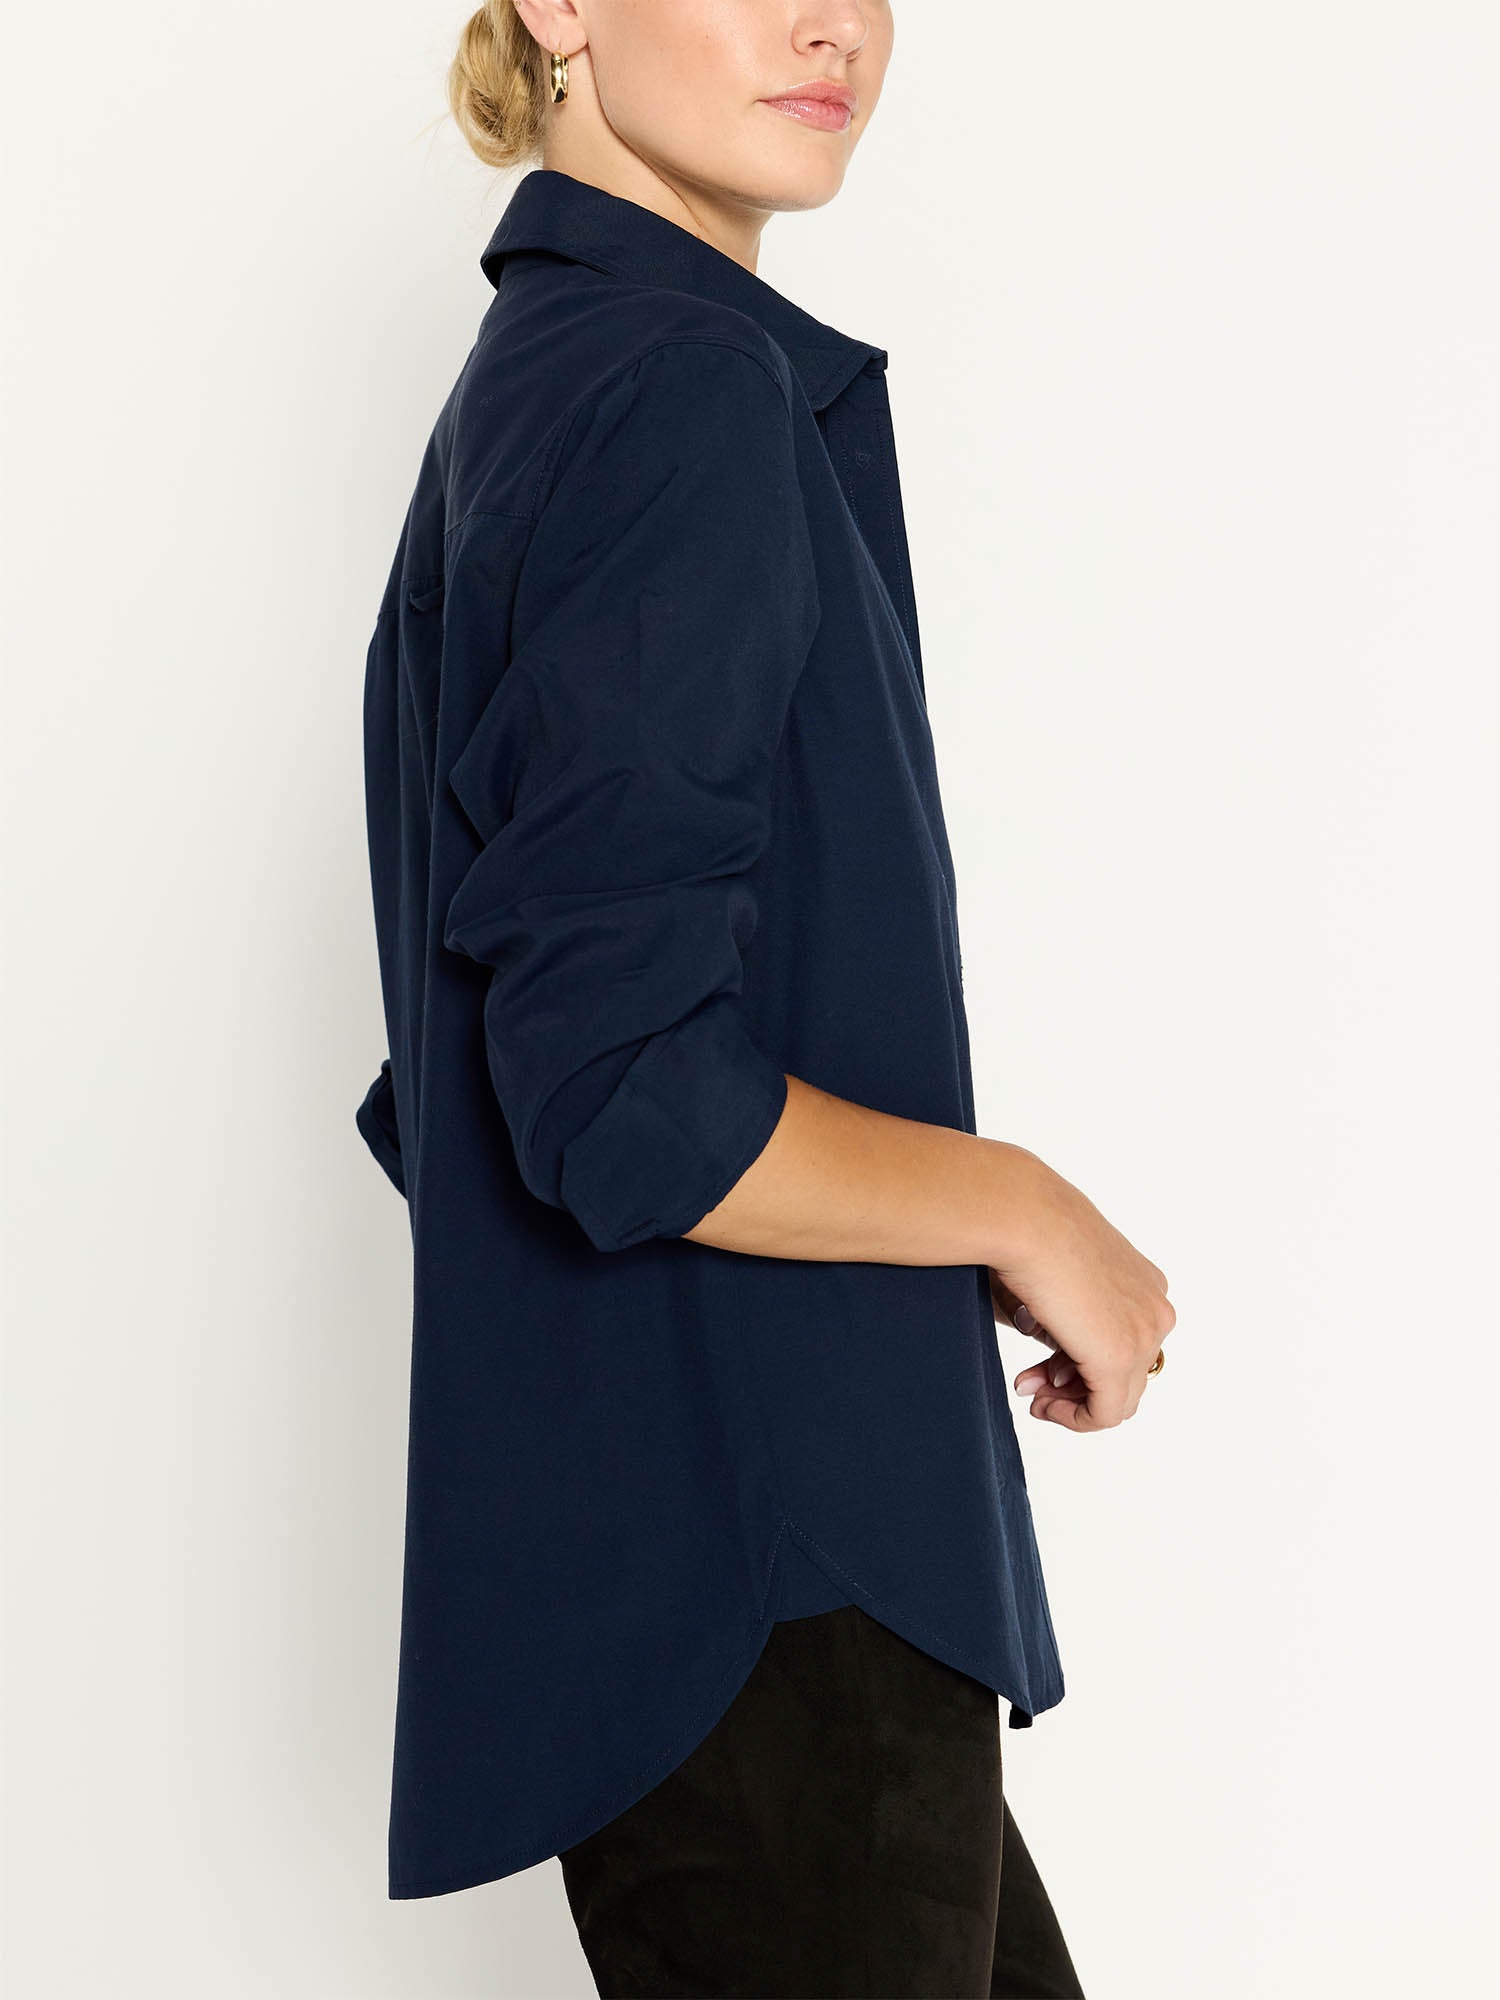 Everyday button up navy shirt side view